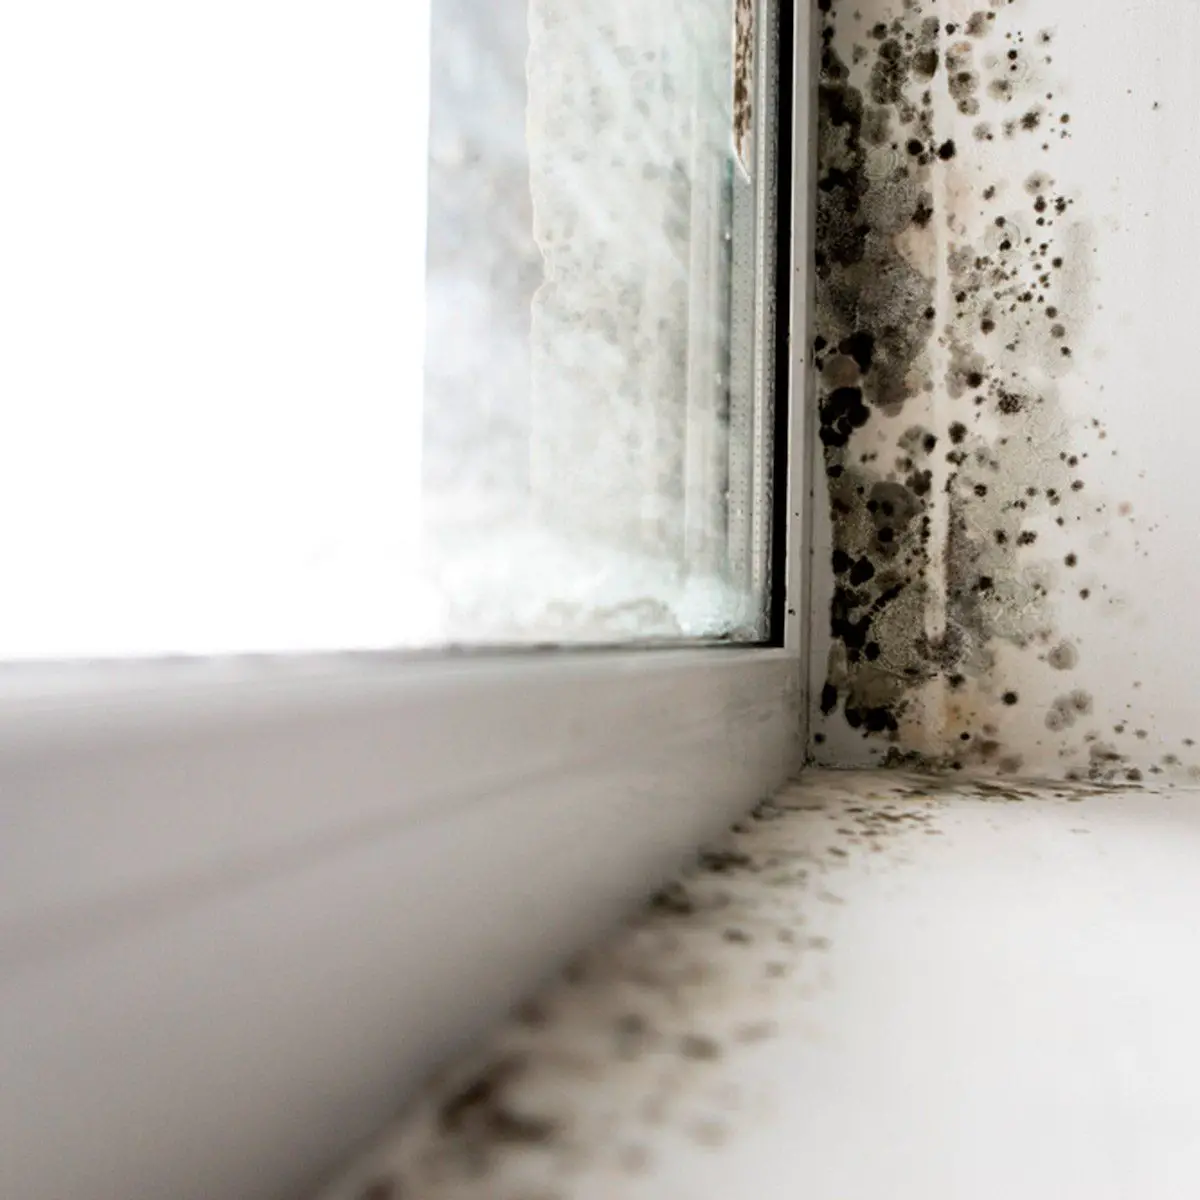 12 Hidden Signs Your House Could Have Toxic Mold